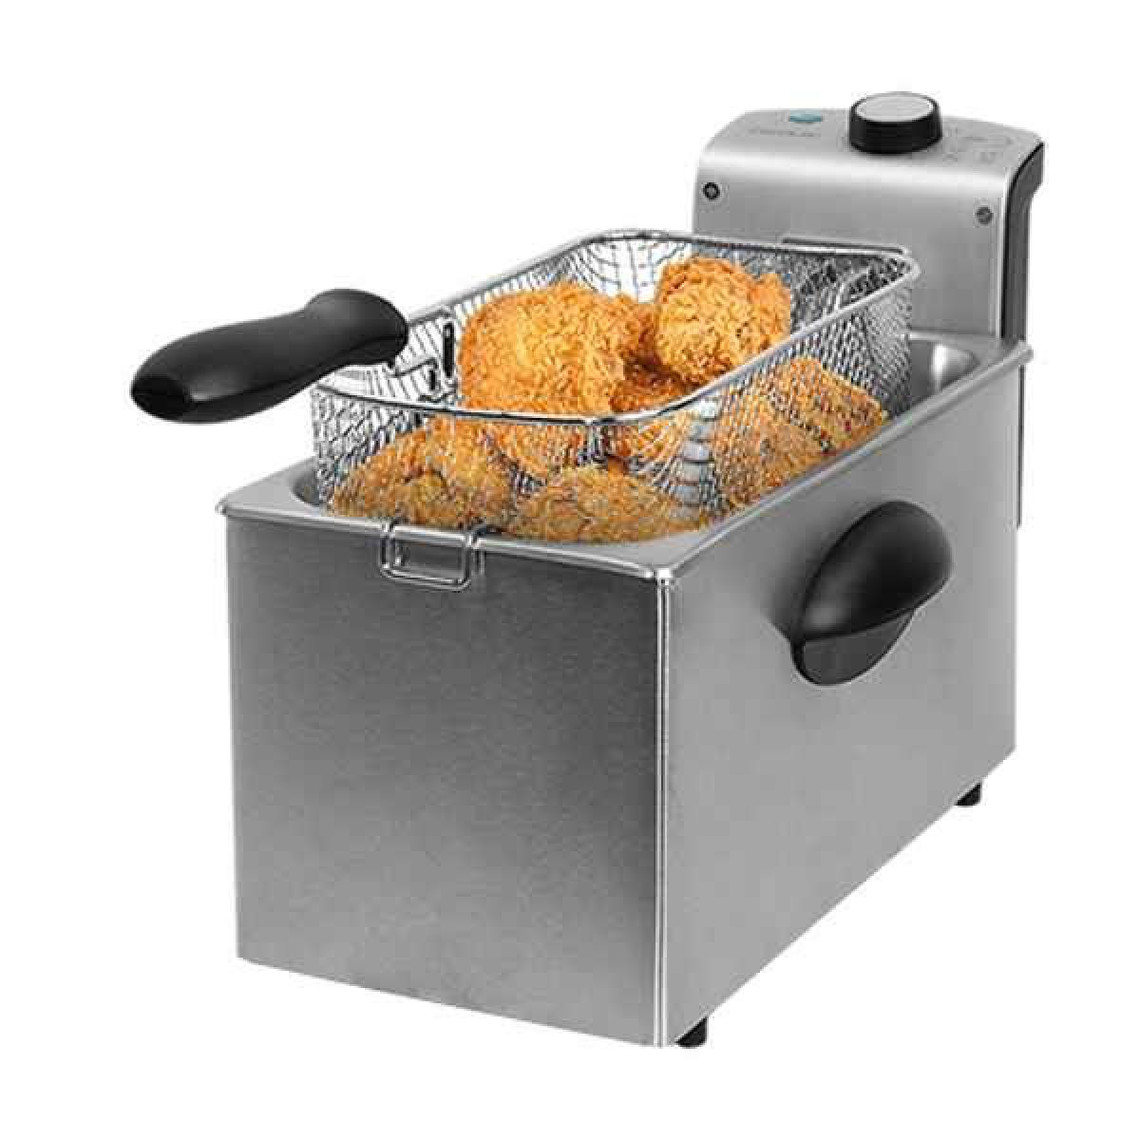 Cecotec Friteuse Cecotec CleanFry 3000 Inox 3 L 2180 W